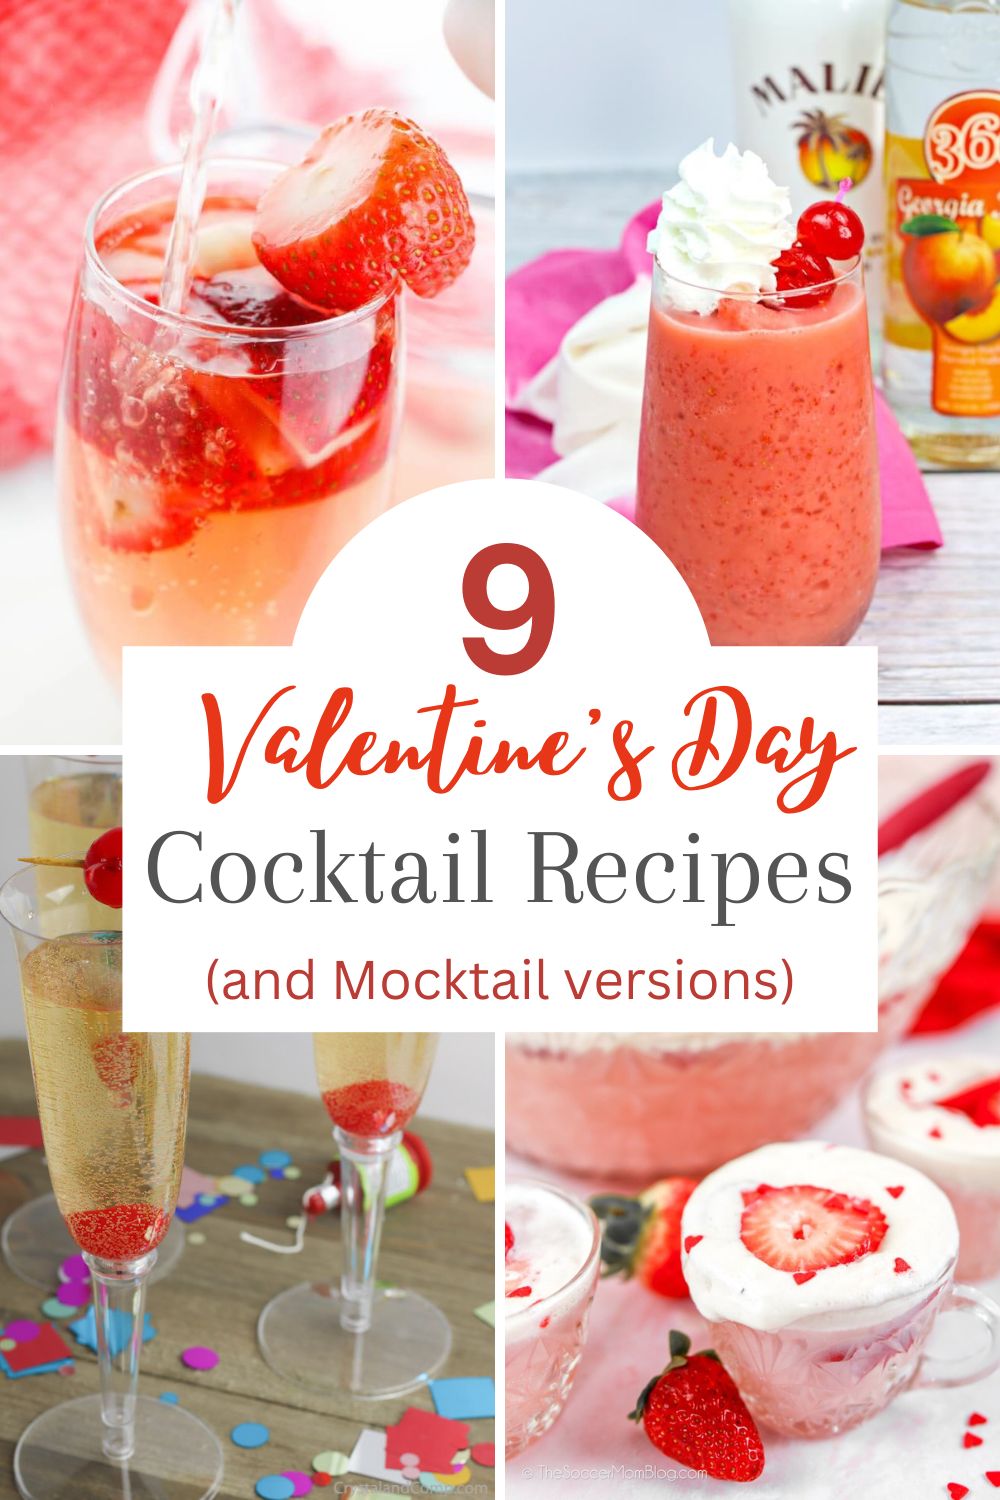 Delicious Cocktails And Mocktails Versions